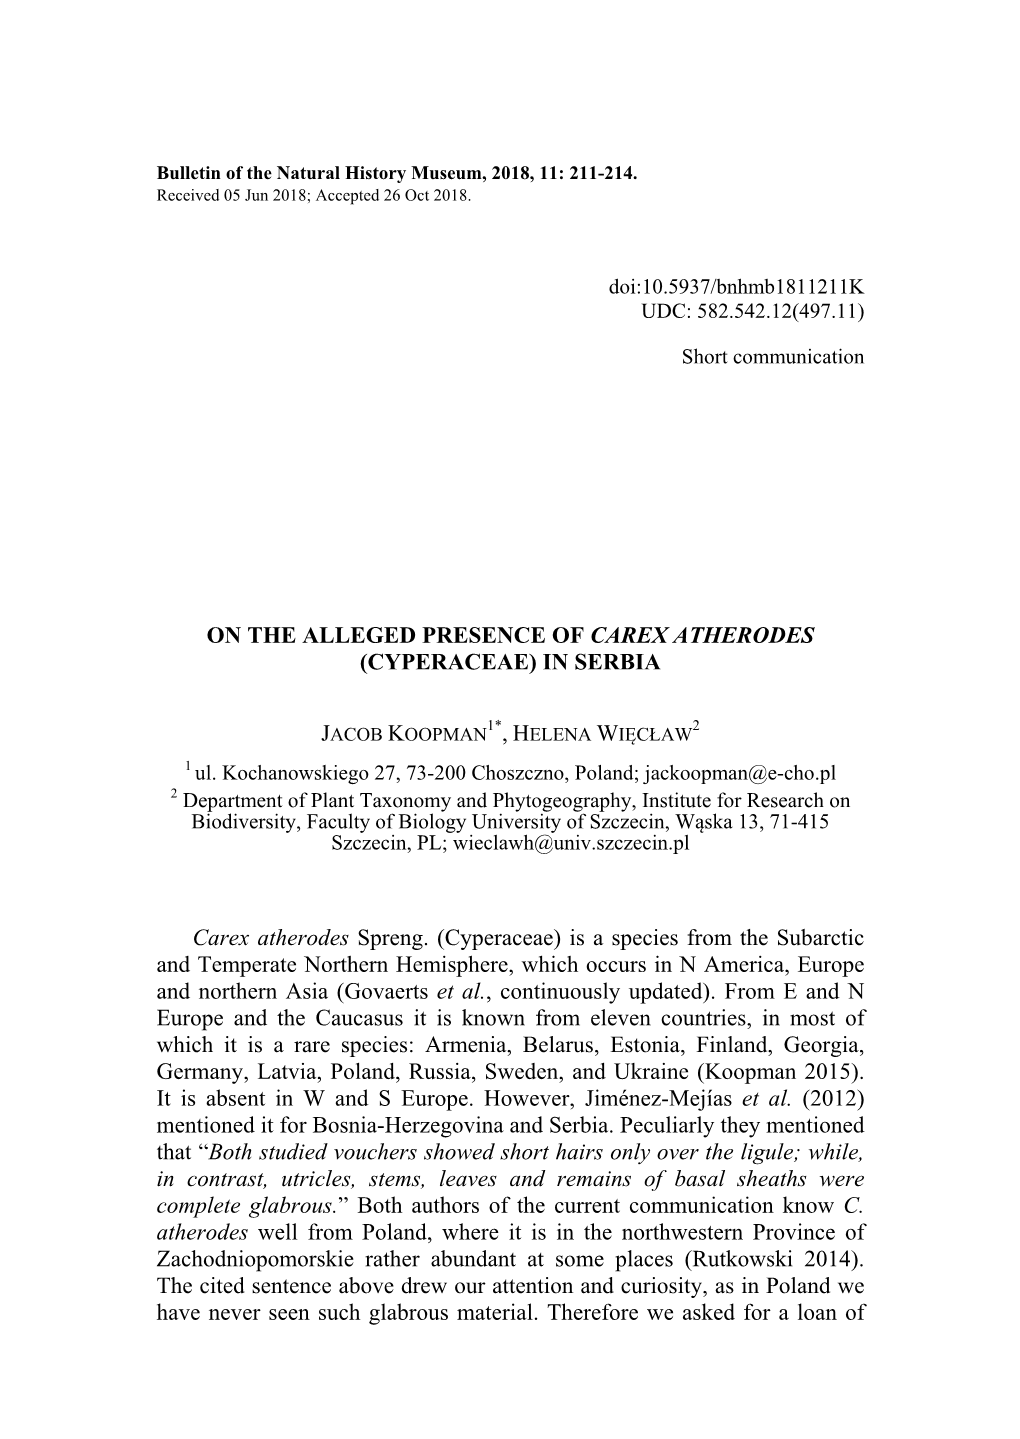 On the Alleged Presence of Carex Atherodes (Cyperaceae) in Serbia